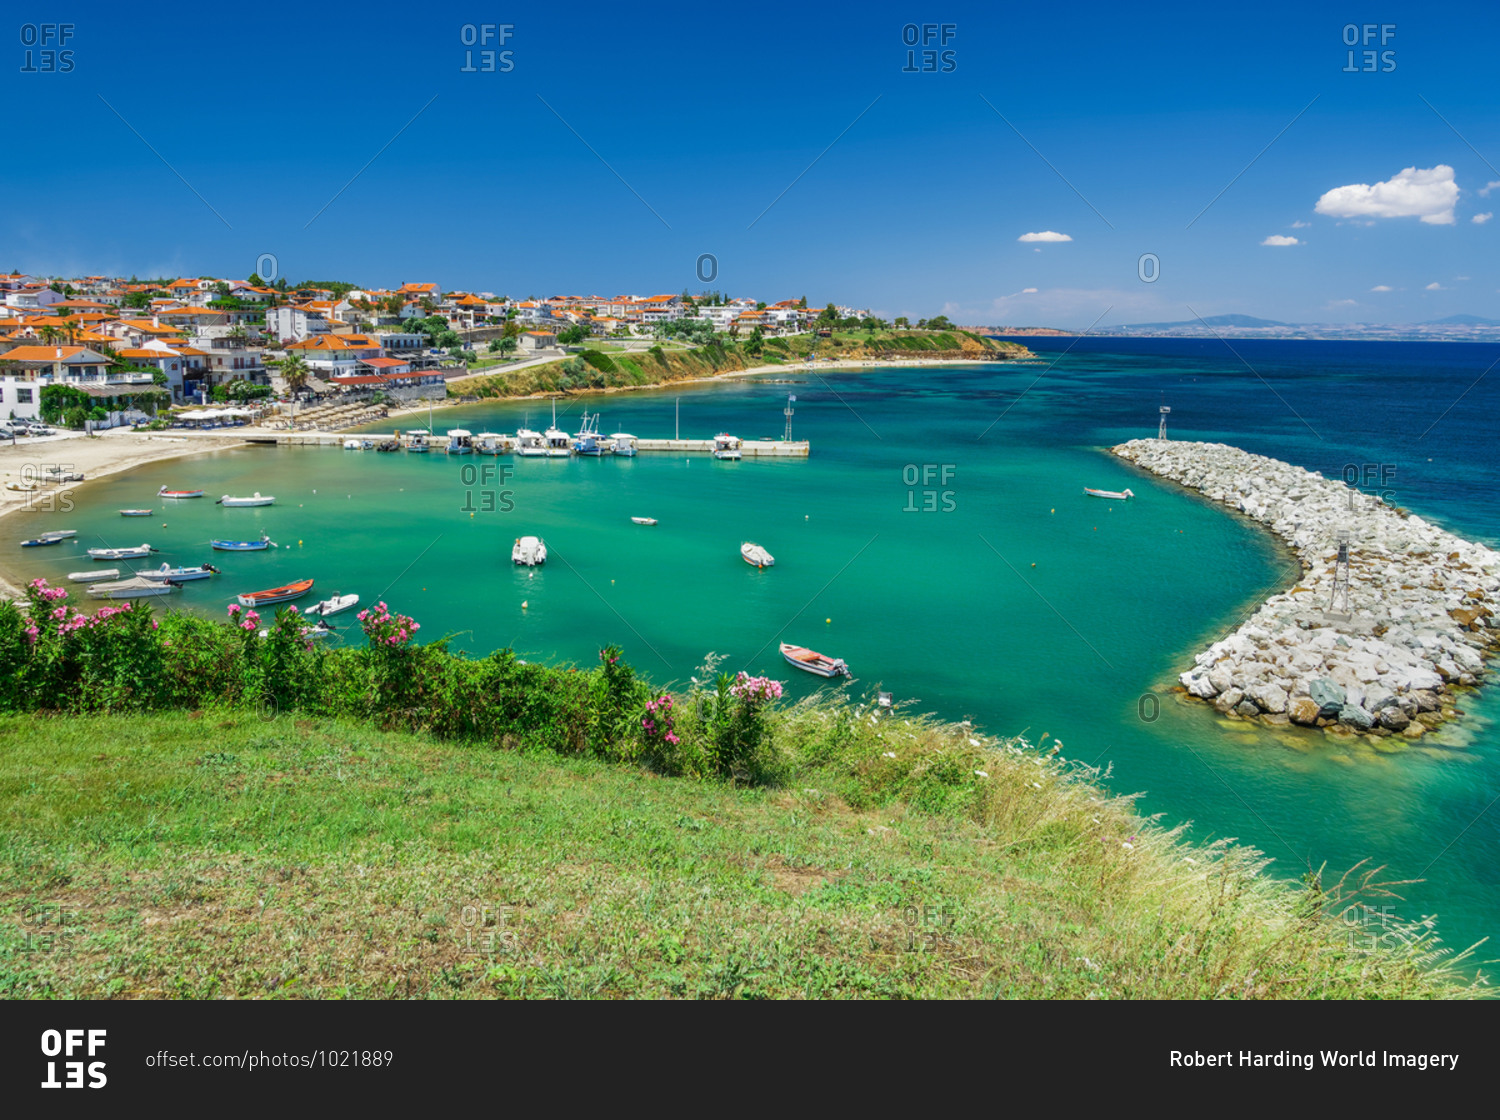 Coastal village with fishing port, hilltop view of Nea Fokaia at Kassandra peninsula with low rise buildings, Chalkidiki, Greece, Europe